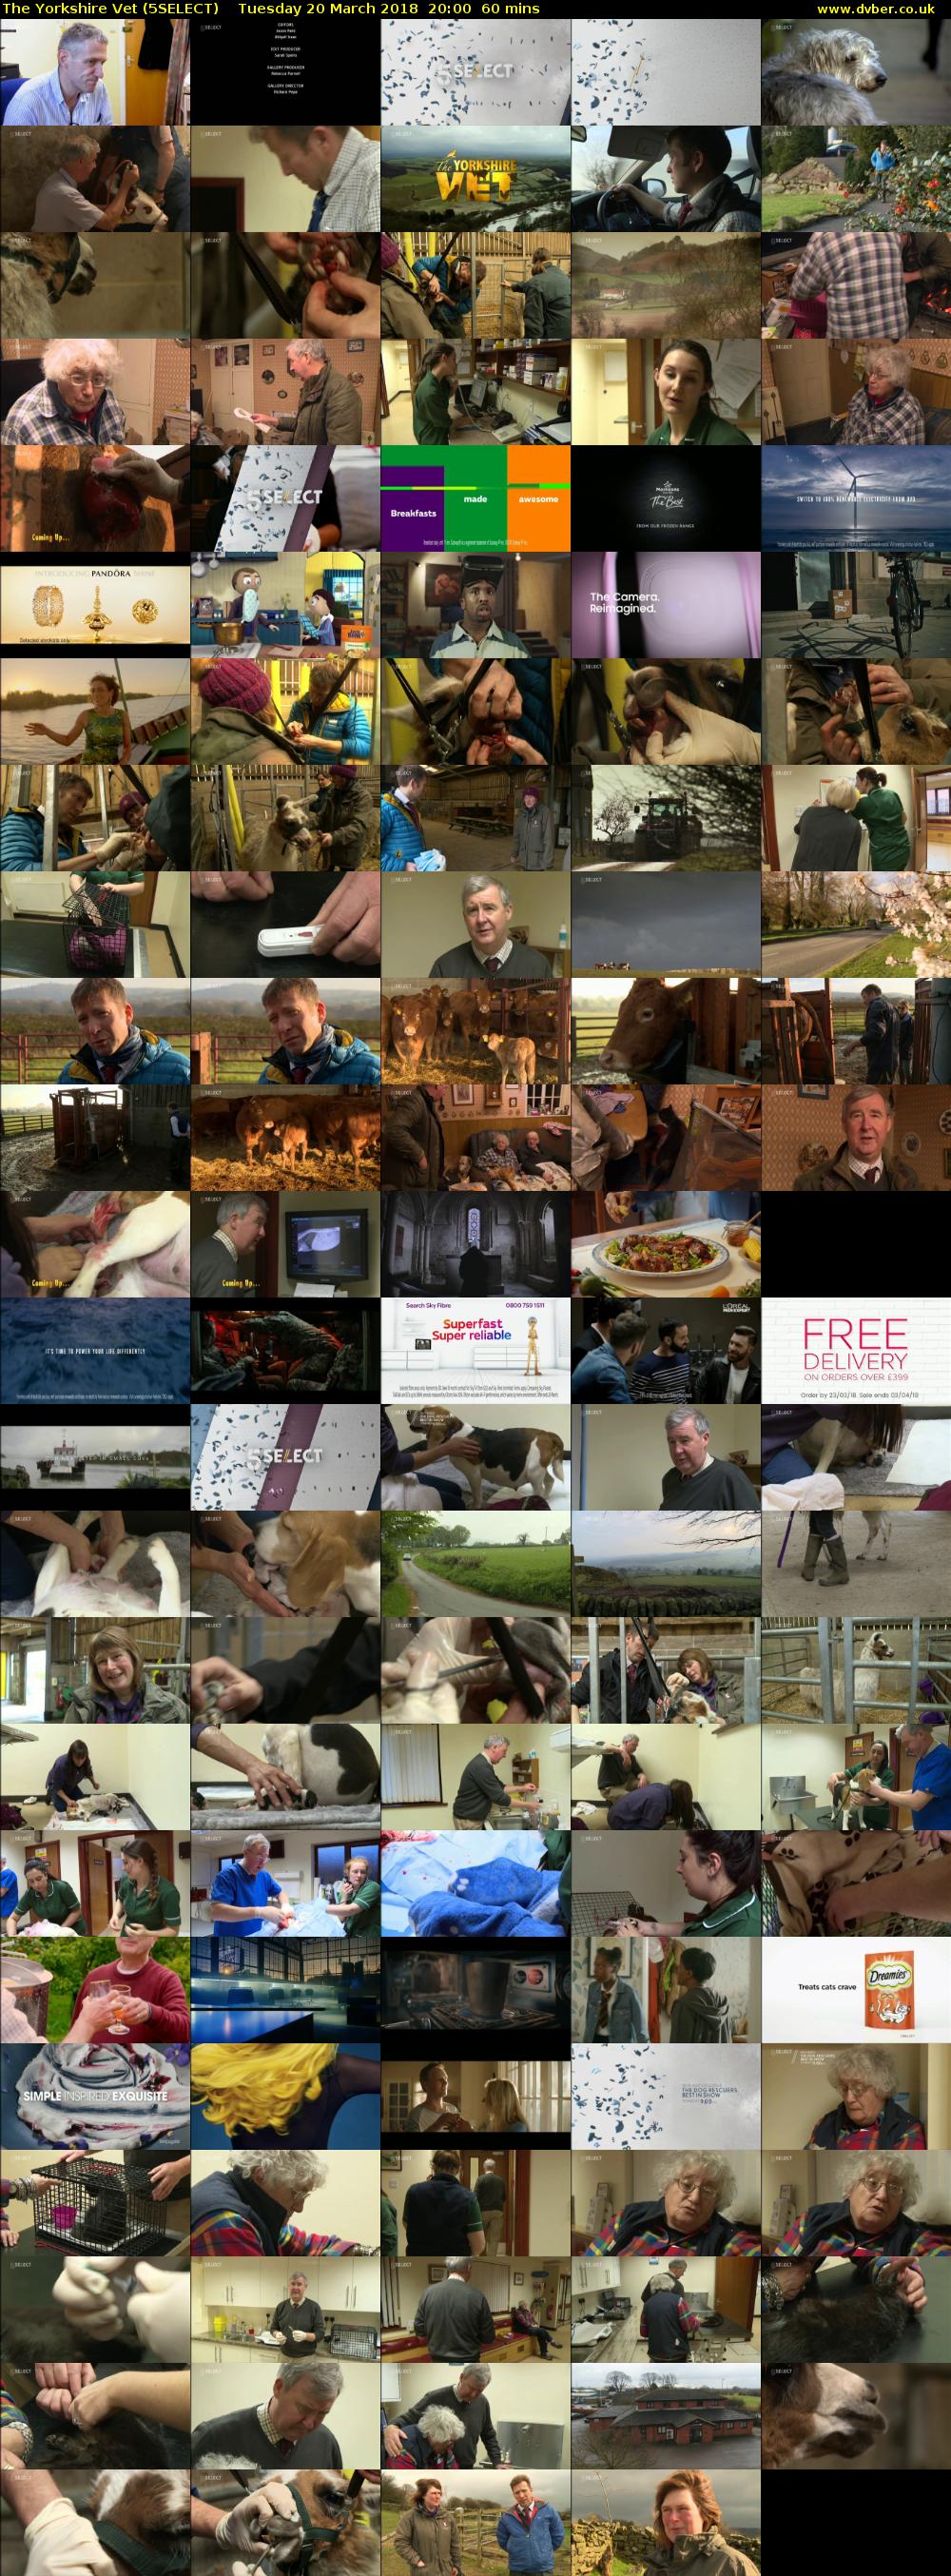 The Yorkshire Vet (5SELECT) Tuesday 20 March 2018 20:00 - 21:00